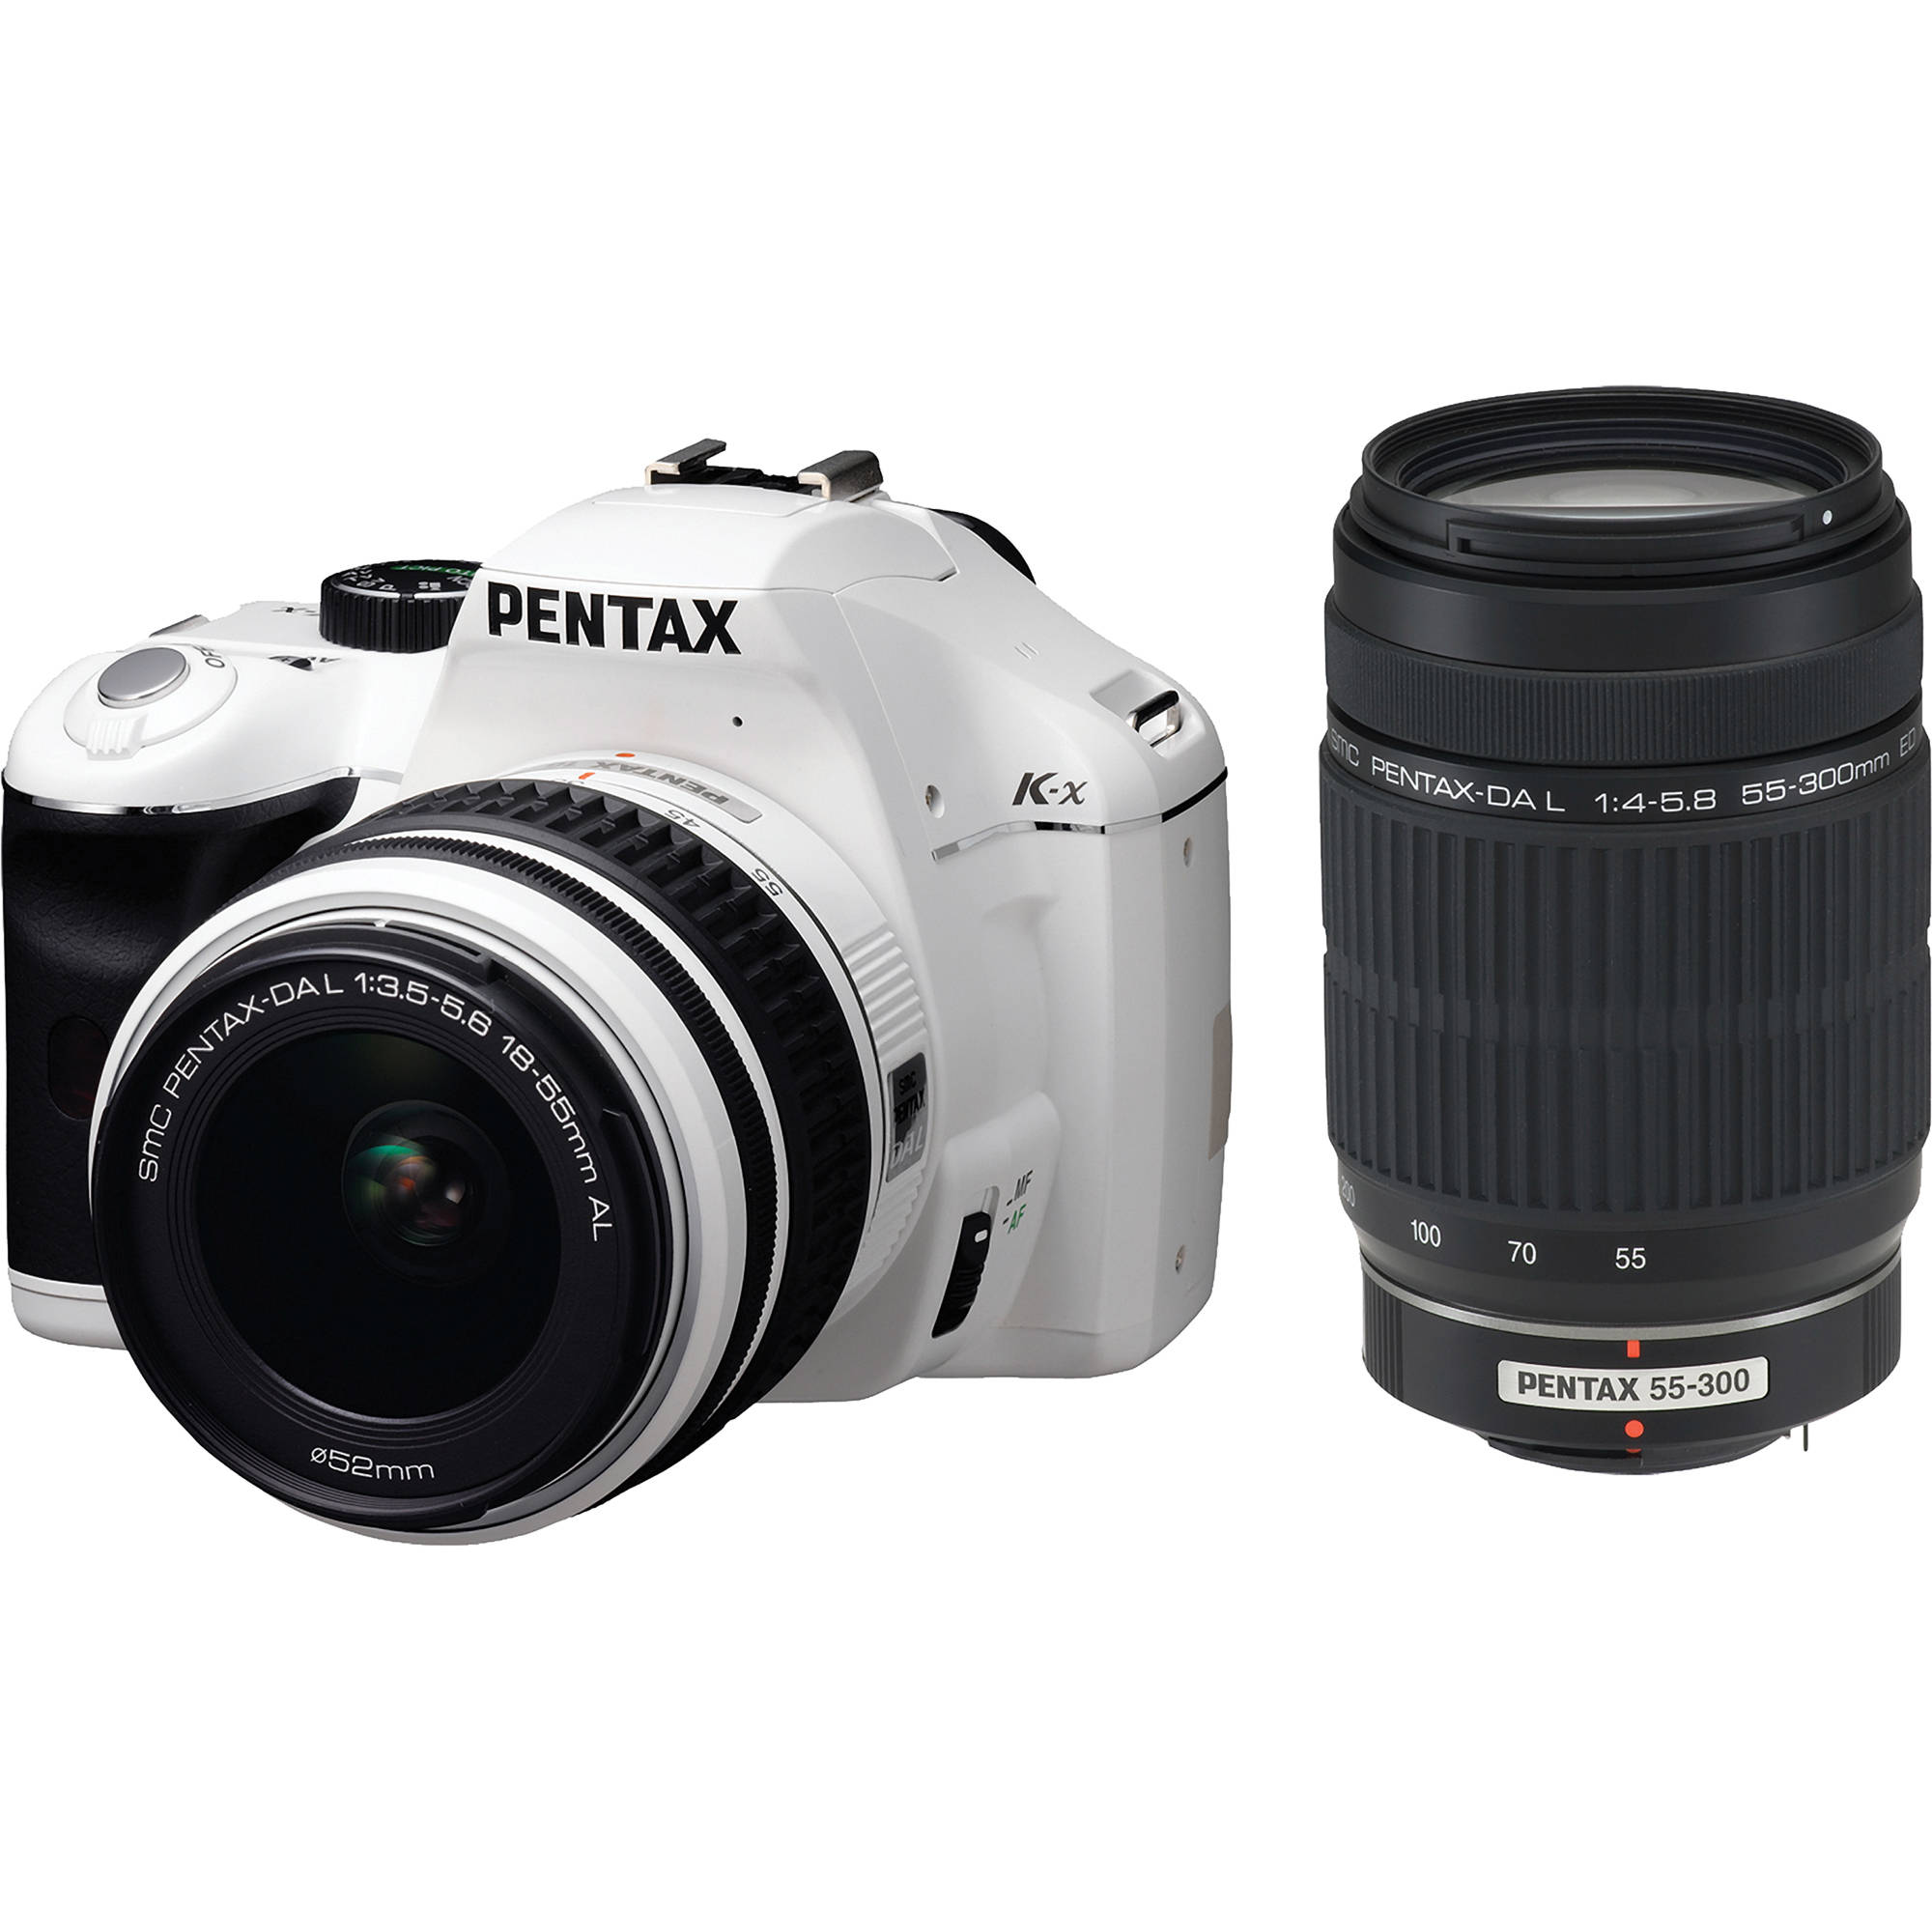 Pentax Kx Digital SLR with 1855mm and 55300mm Zoom